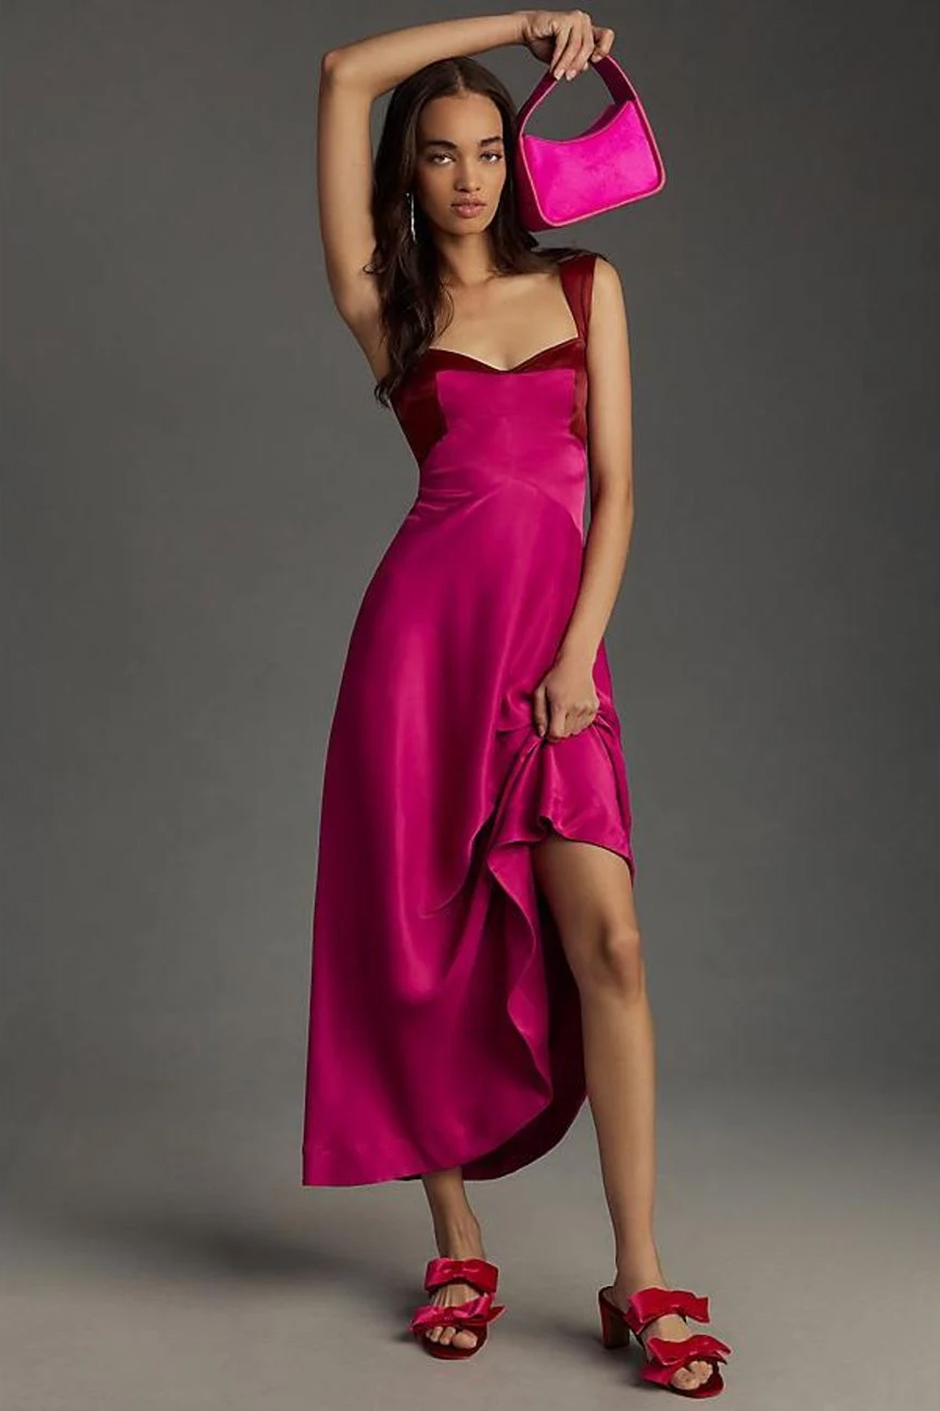 Two-tone pink satin sleeveless midi dress from Anthropologie as summer wedding guest dress idea